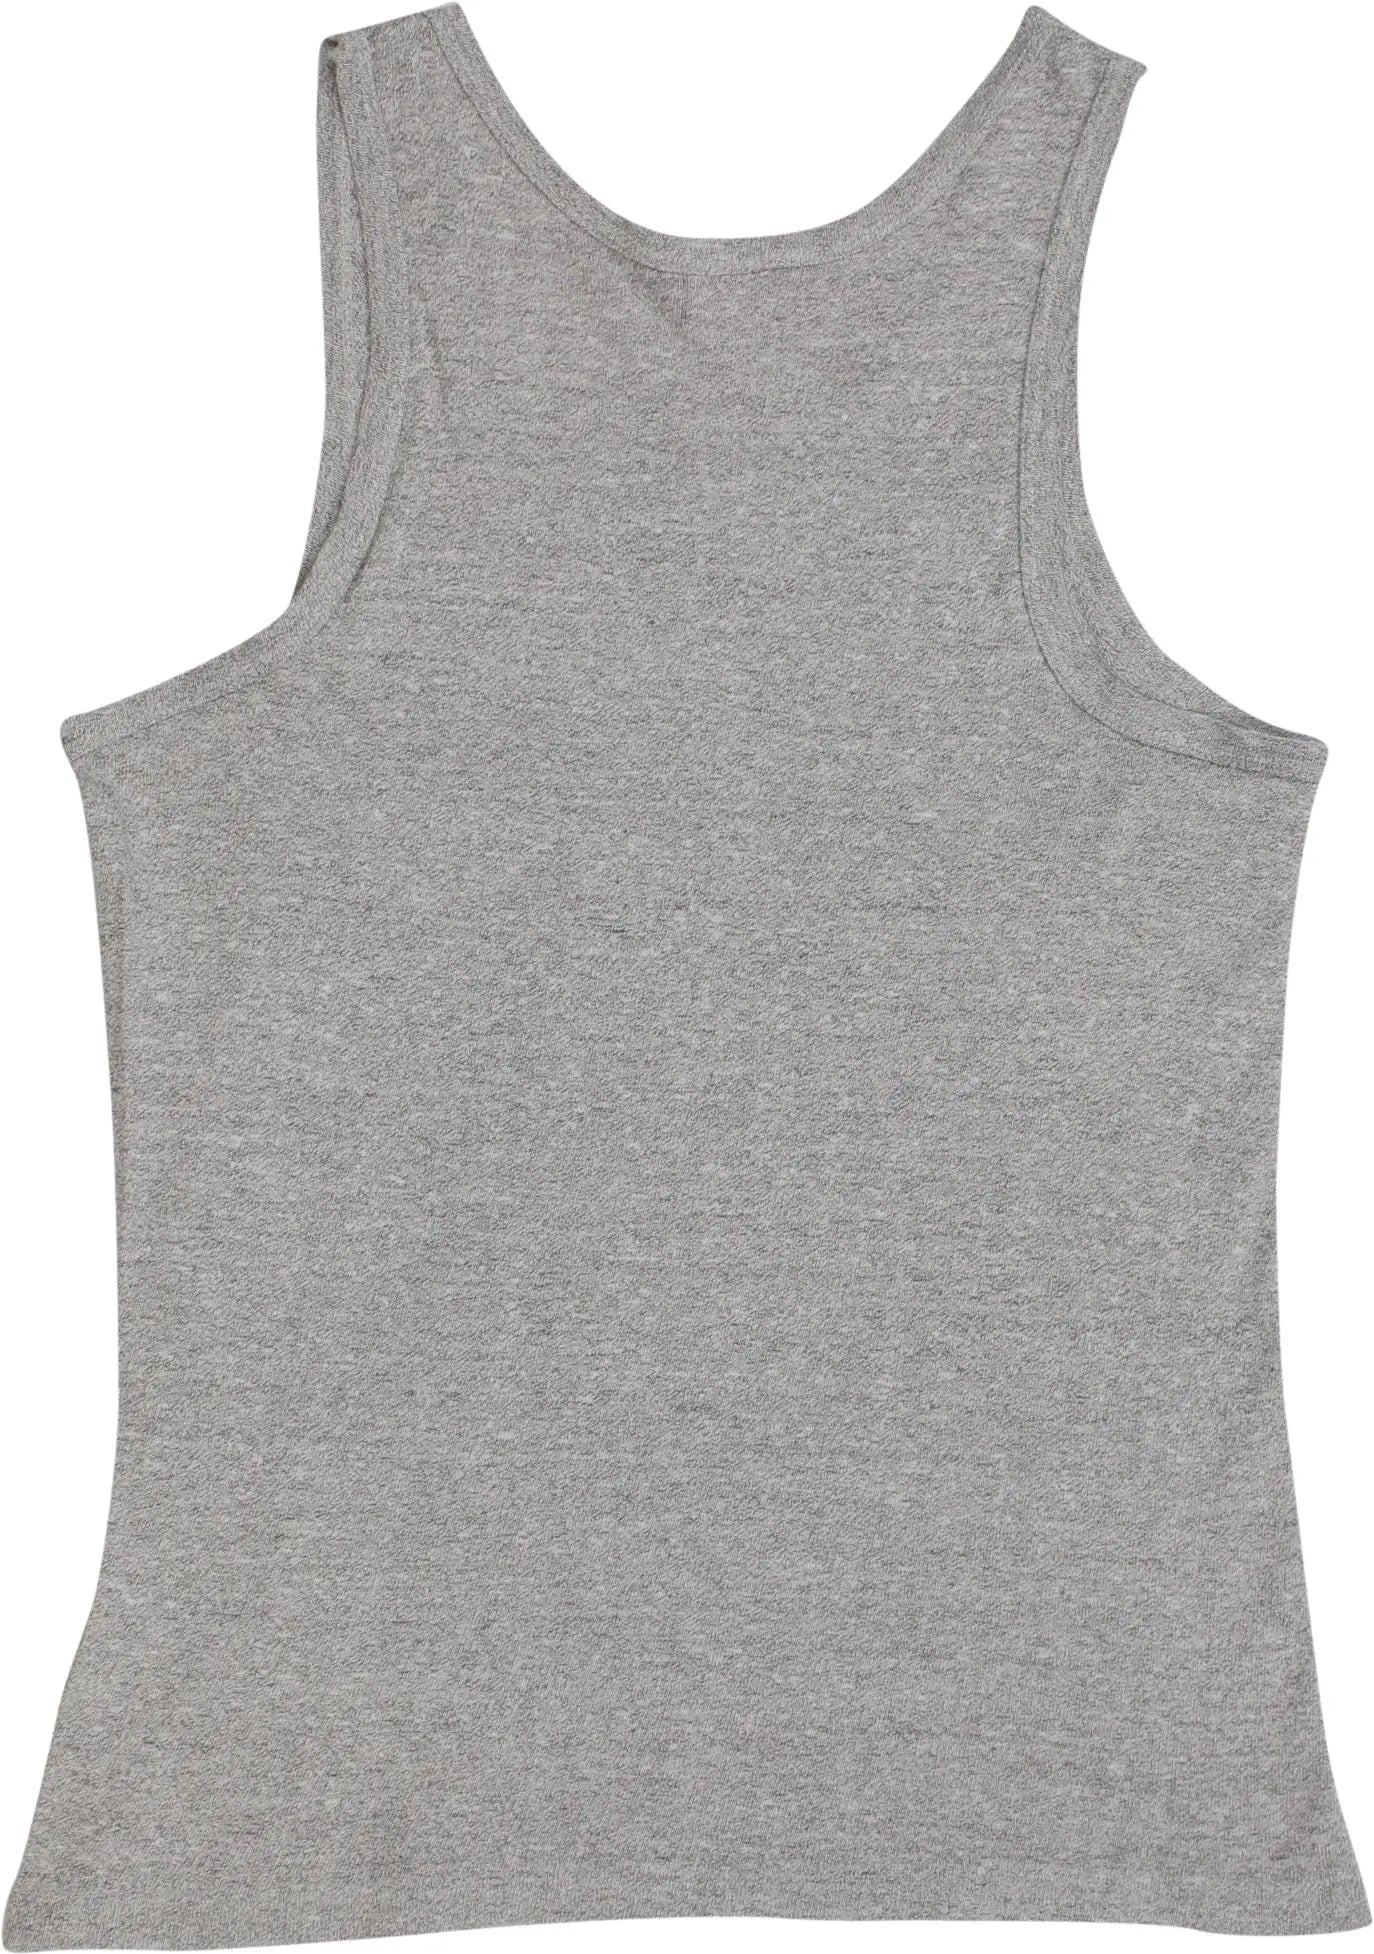 Champion - Grey Tank Top by Champion- ThriftTale.com - Vintage and second handclothing